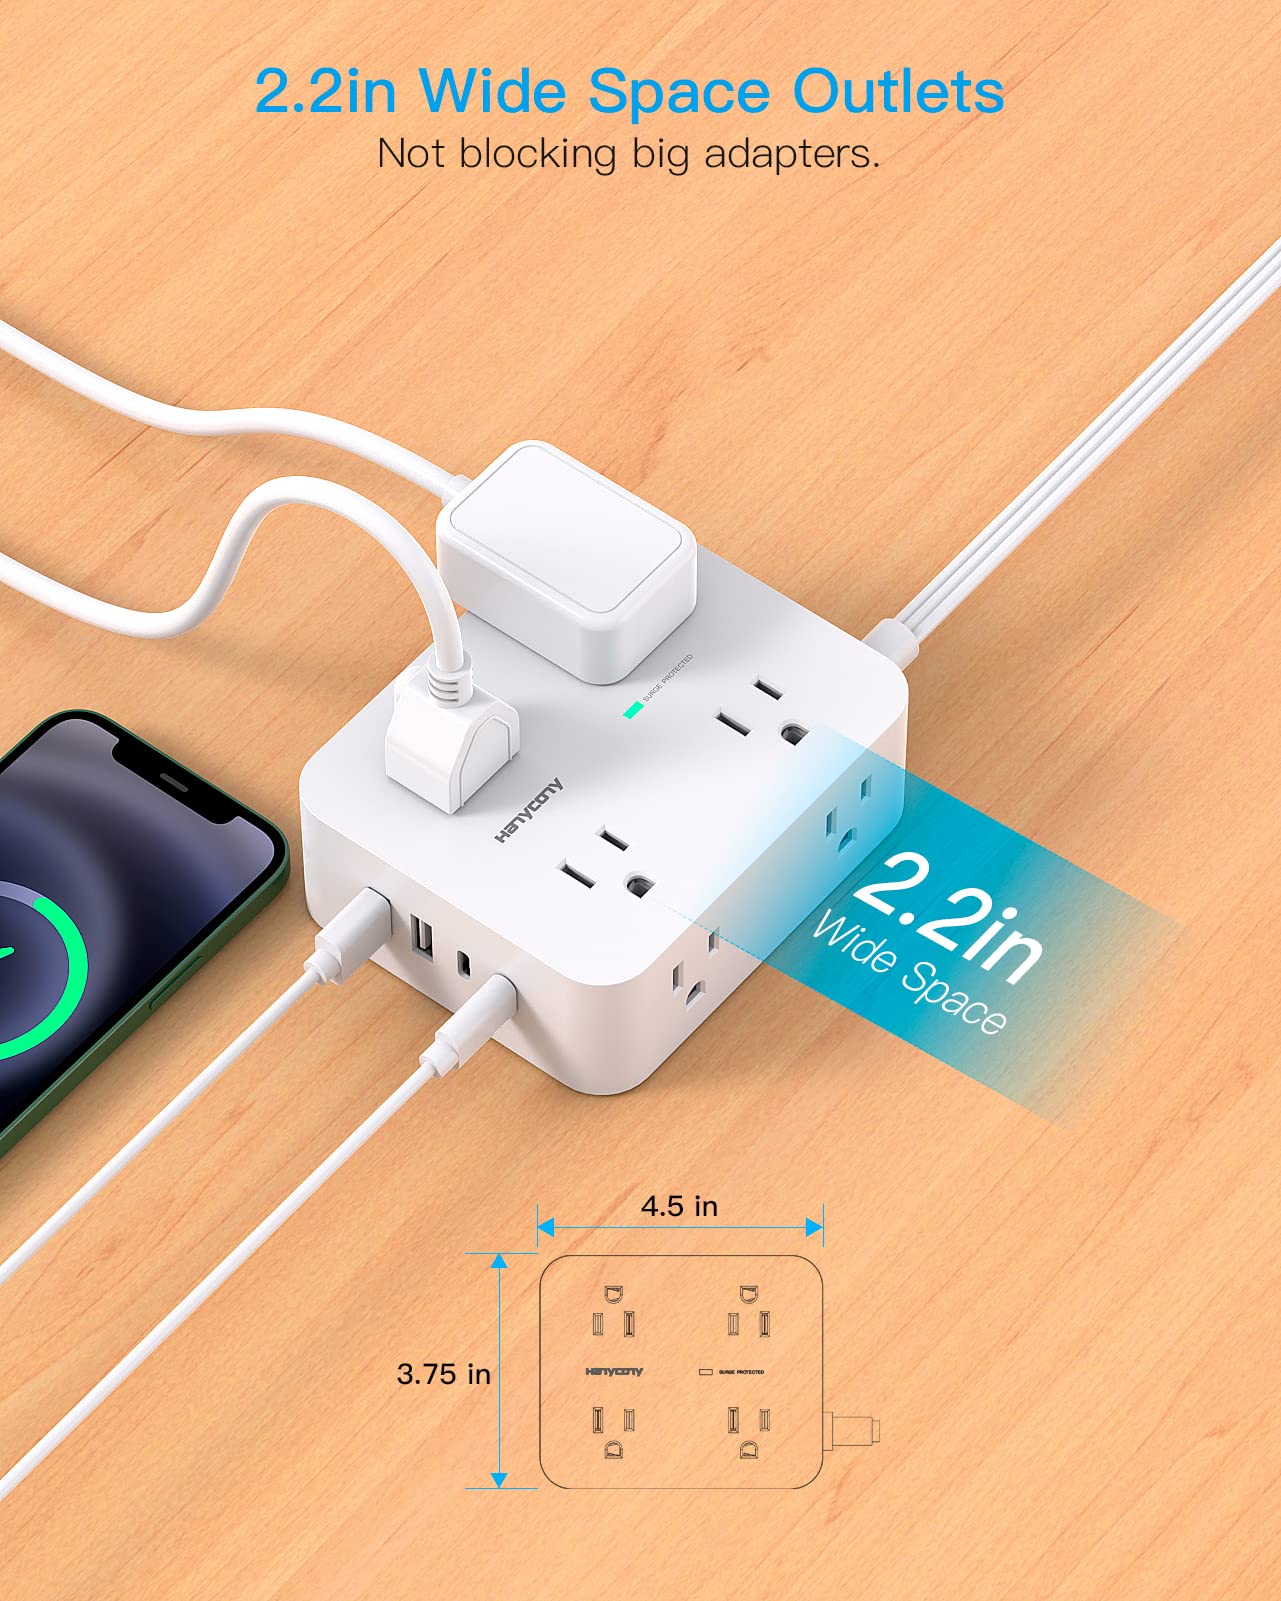 Flat Extension Cord, 5 Ft Ultra Thin Flat Plug Power Strip Surge Protector, 8 Widely Outlet Extender 4 USB Ports(2USB C),1080J Multi Plug Outlet Wall Mount for Home Office Dorm Room Travel Essentials